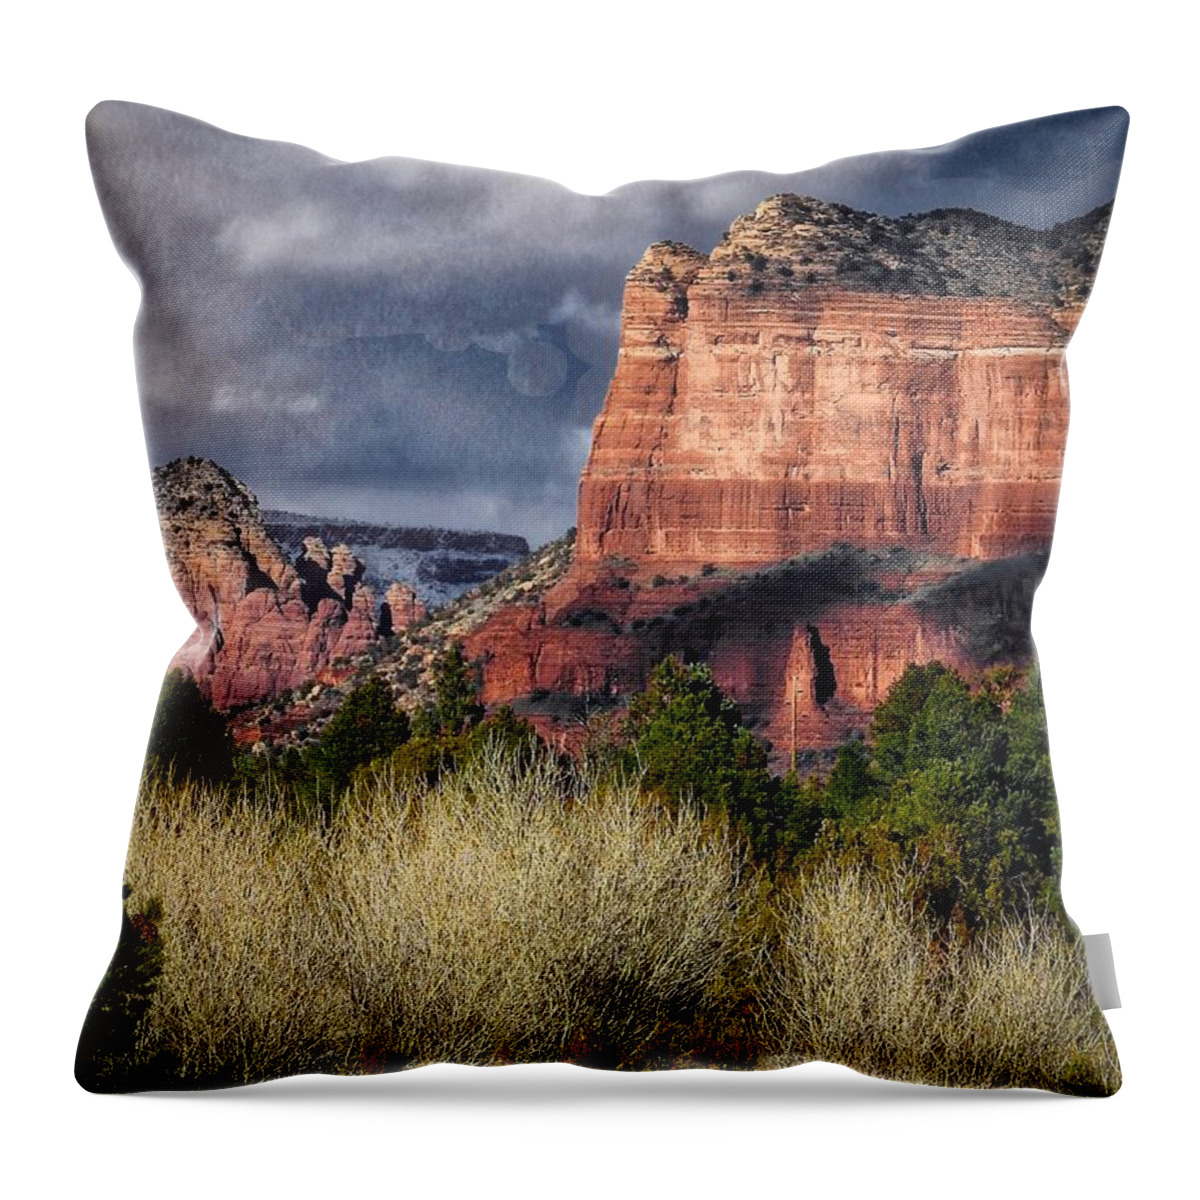 Sedona Throw Pillow featuring the photograph Clouds Over Sedona by Ches Black